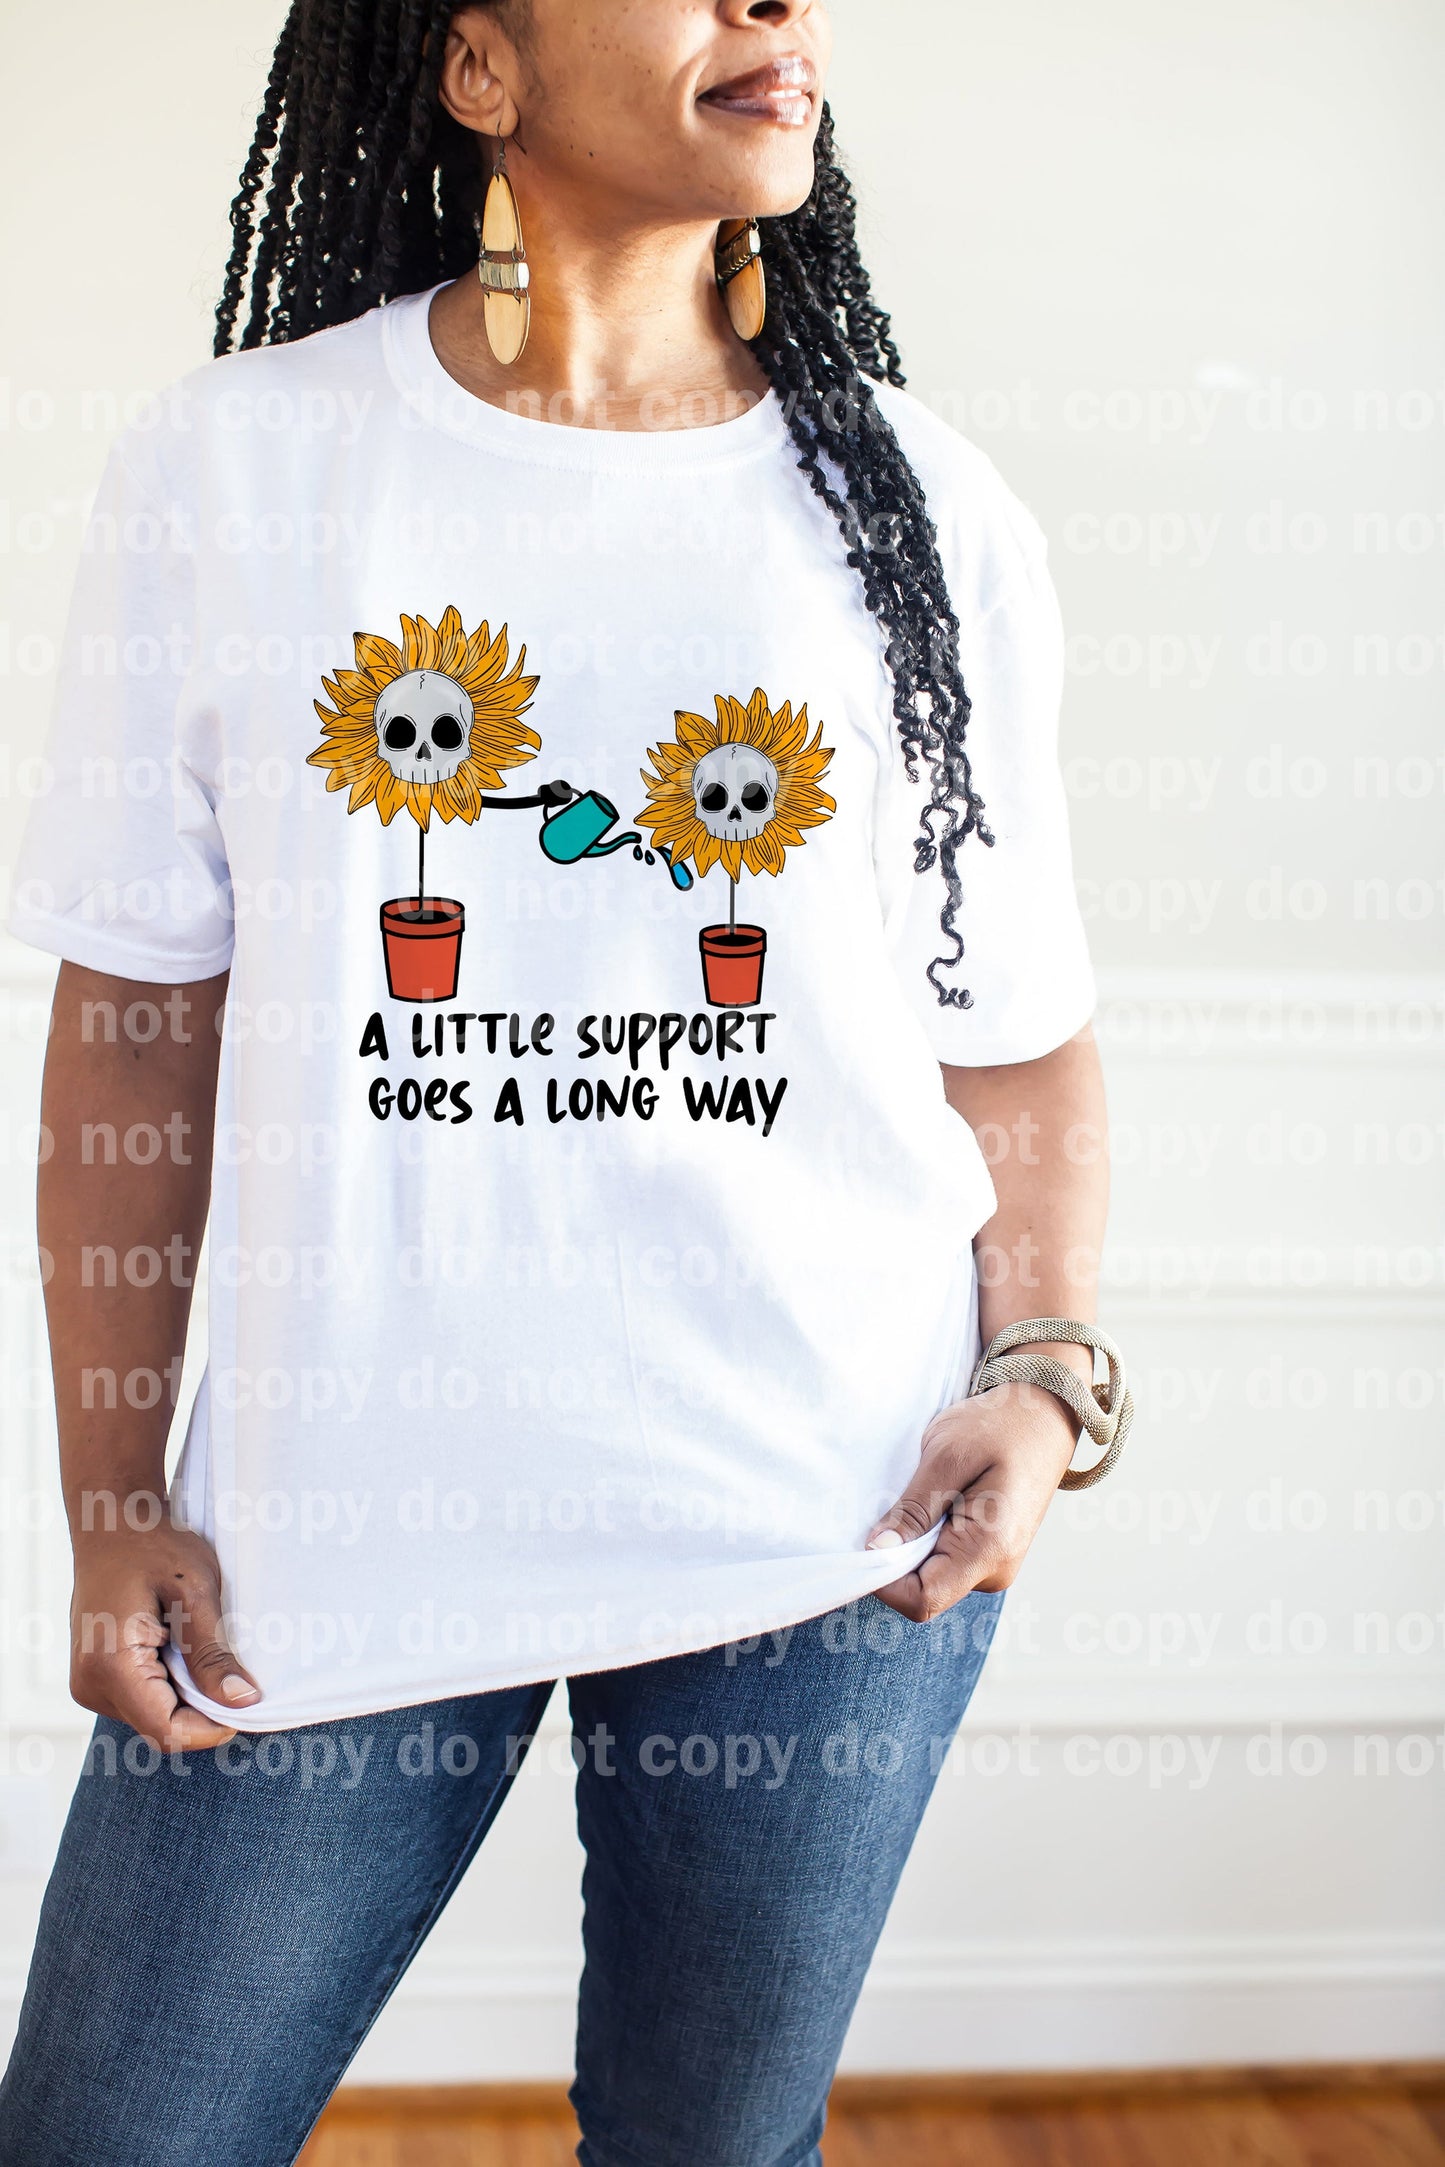 A Little Support Goes A Long Way Black/Orange Dream Print or Sublimation Print